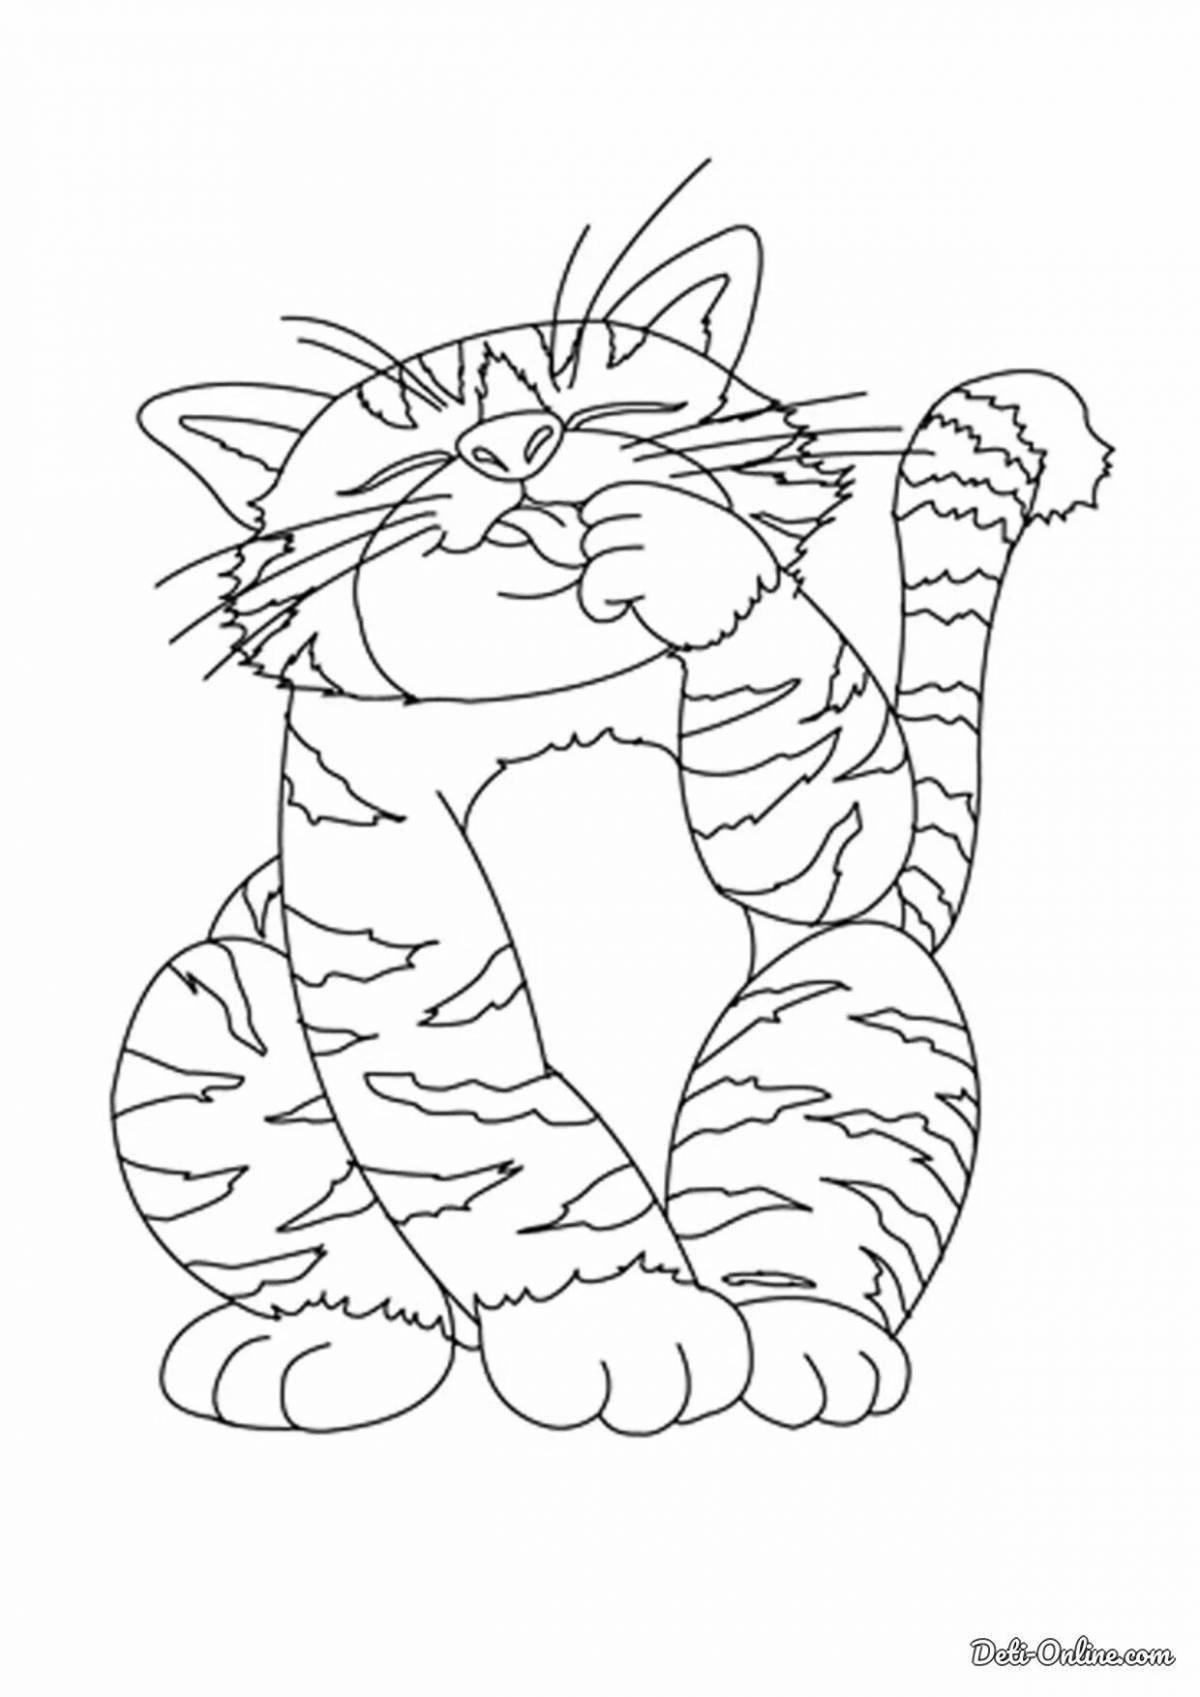 Coloring page funny tabby cat